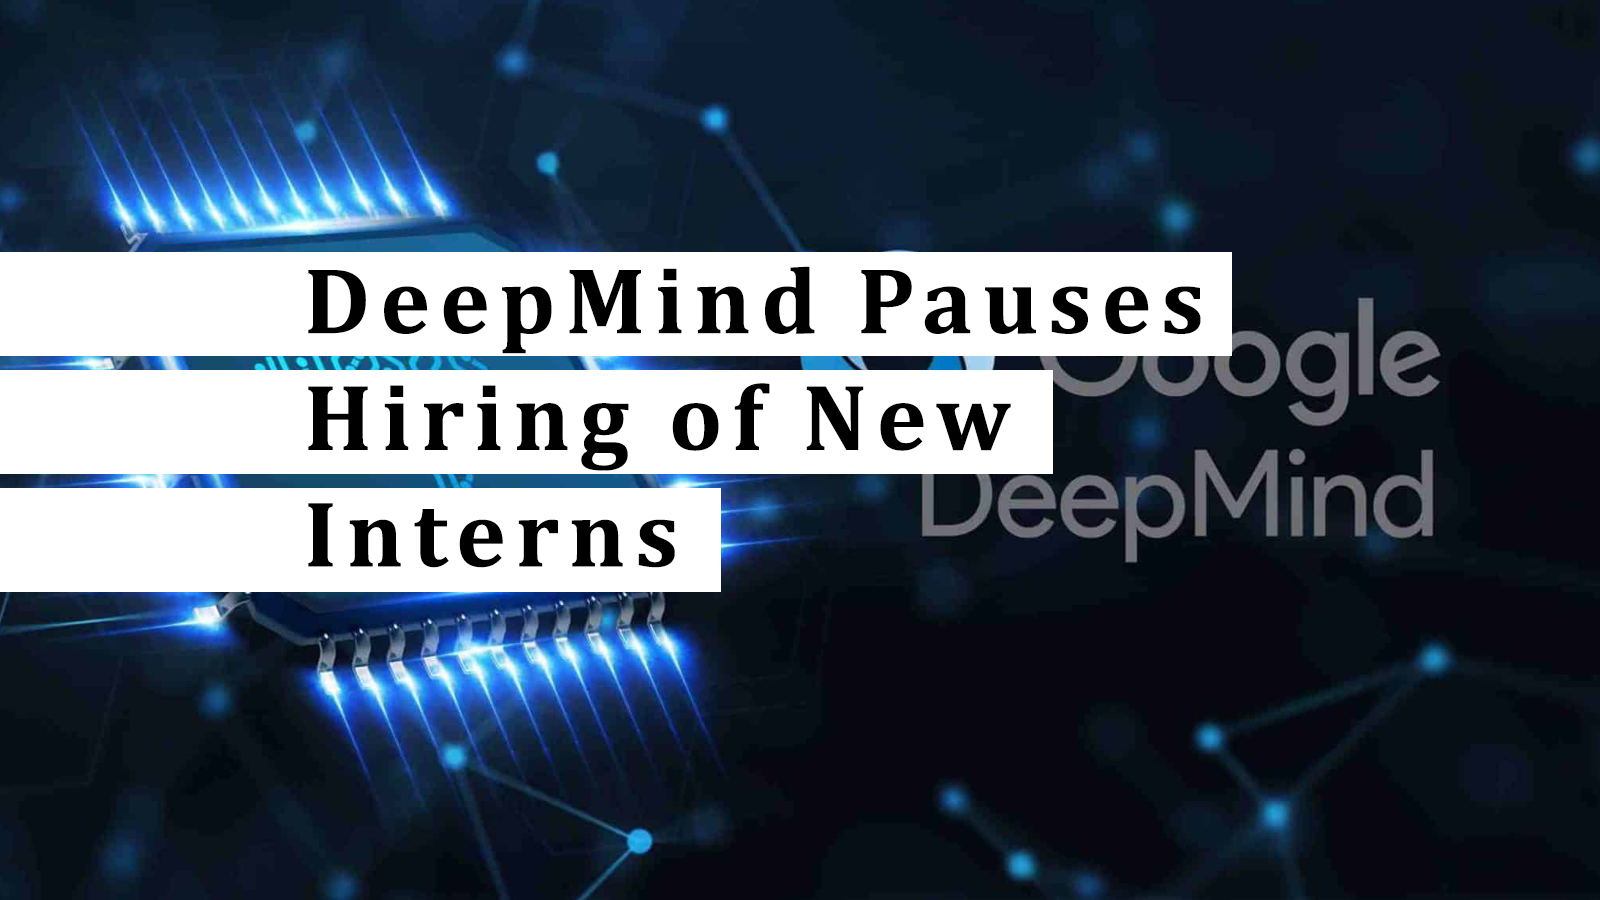 DeepMind Pauses Hiring of New Interns; Here is why